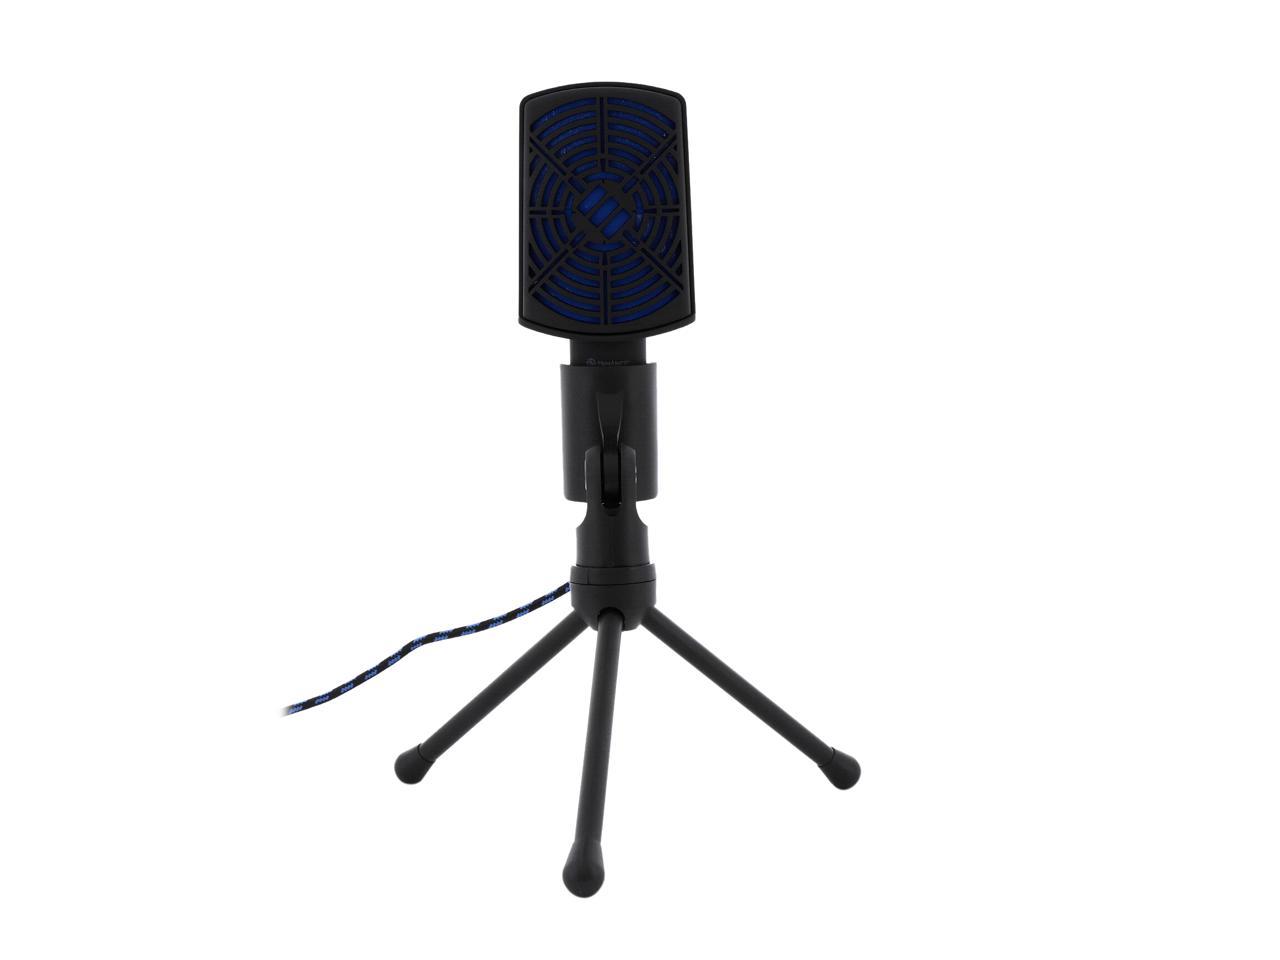 table microphone for skype calls